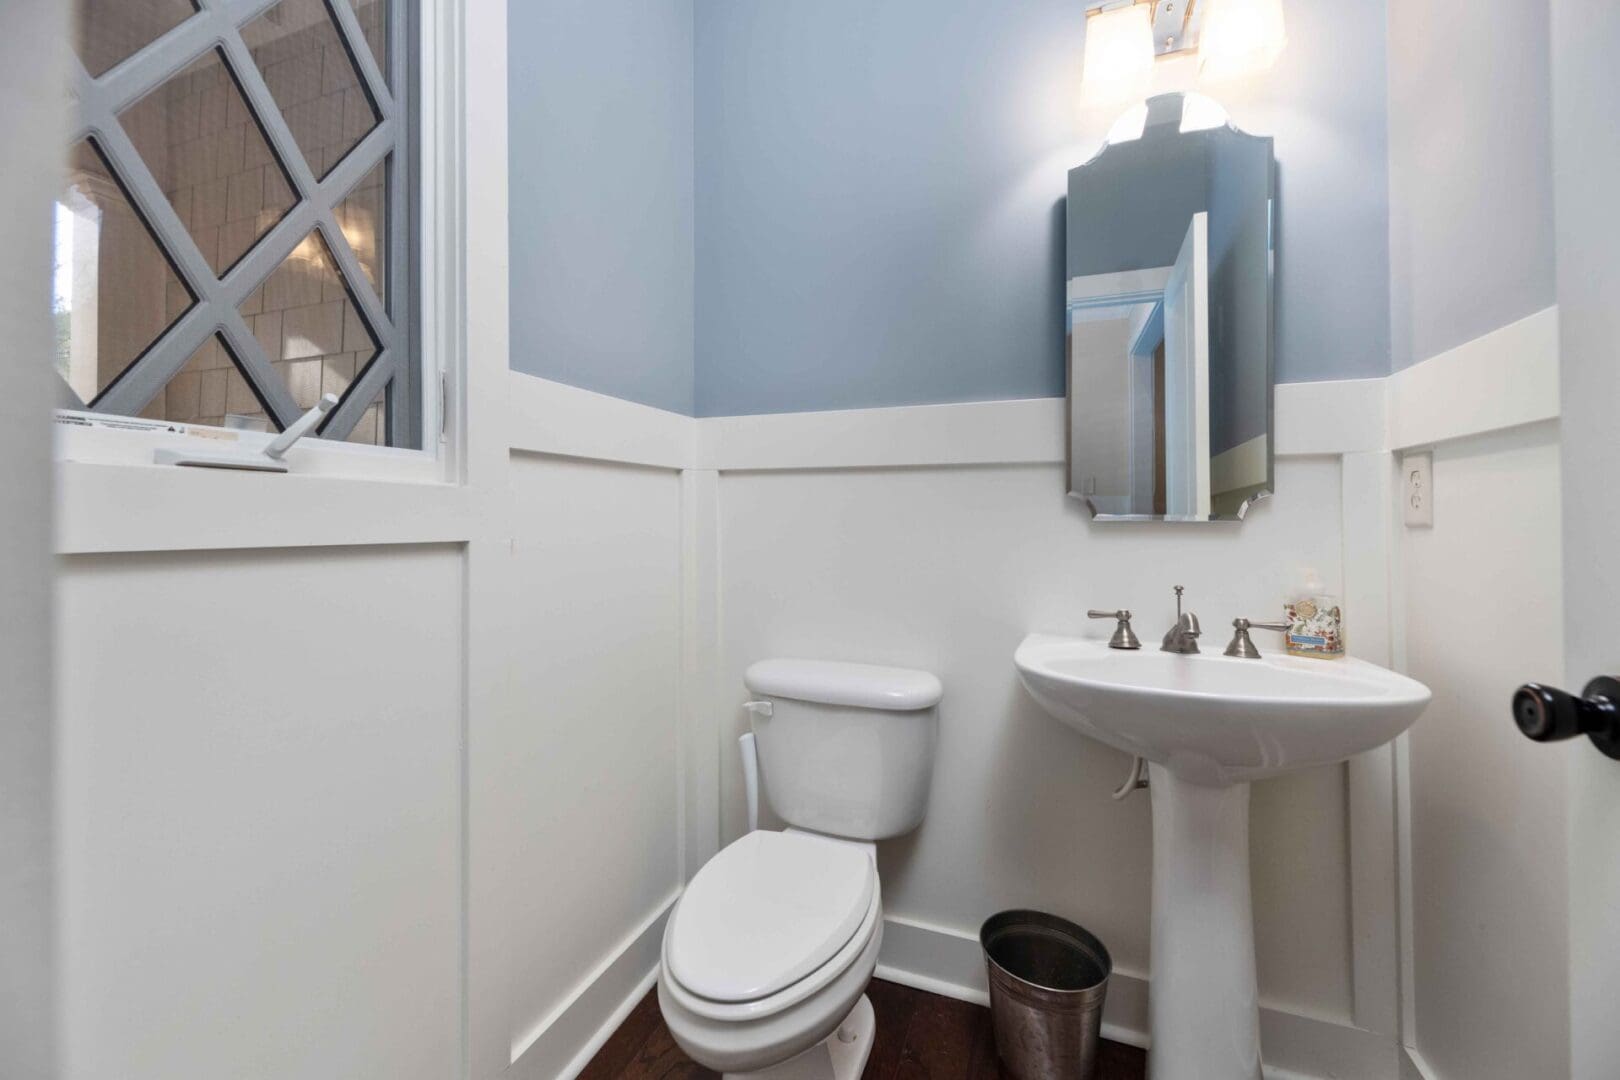 A bathroom with blue walls and white trim.